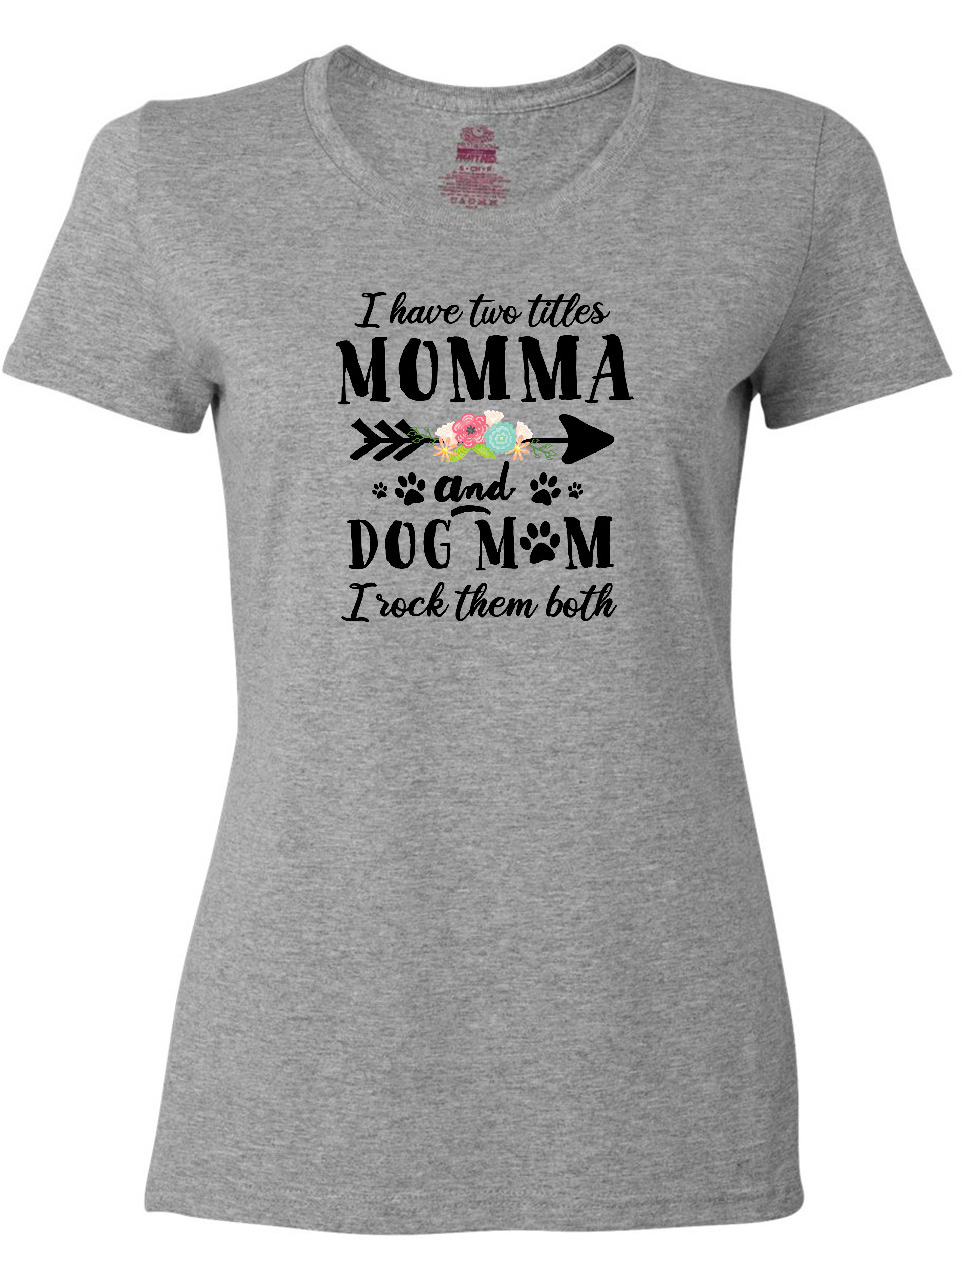 Inktastic I Have 2 Titles Momma and Dog Mom I Rock Them Both Women's T-Shirt - image 1 of 4